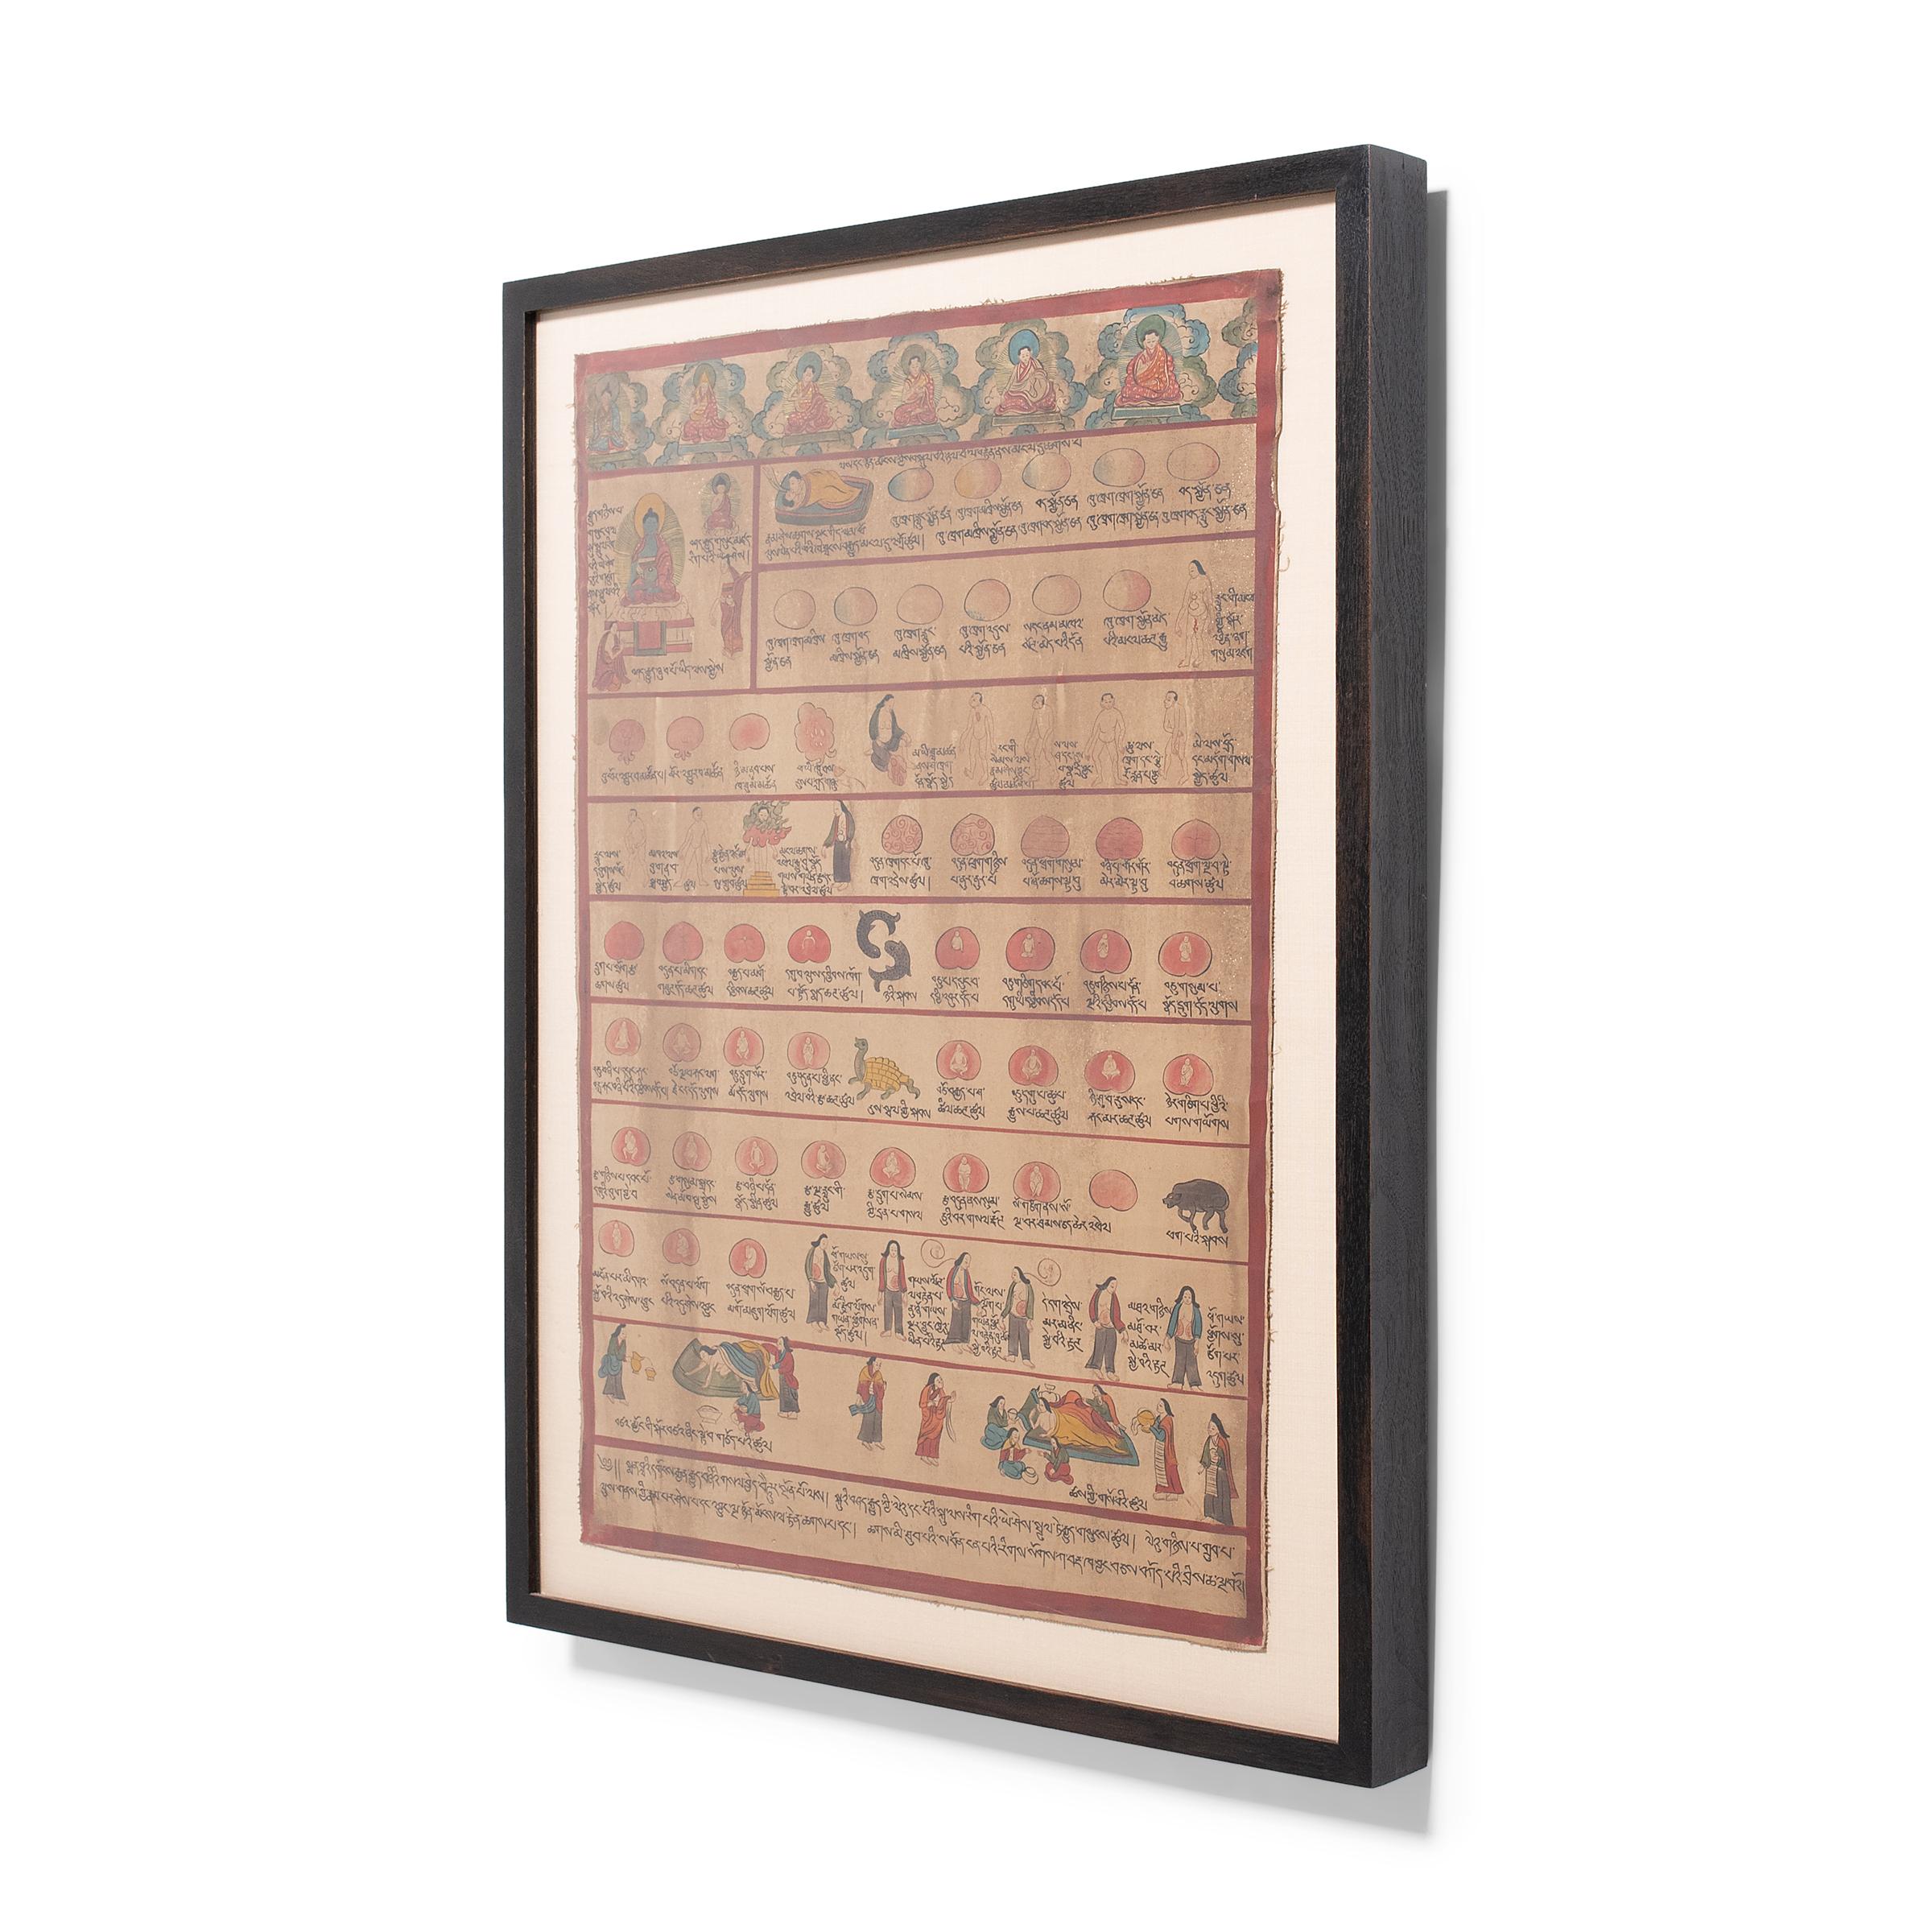 This beautifully detailed Tibetan folk painting dates to the mid-20th century and shares traditional knowledge in the style of painted Buddhist thangkas or manuscript cards. Intended as a visual aid for learning, the painting illustrates the stages